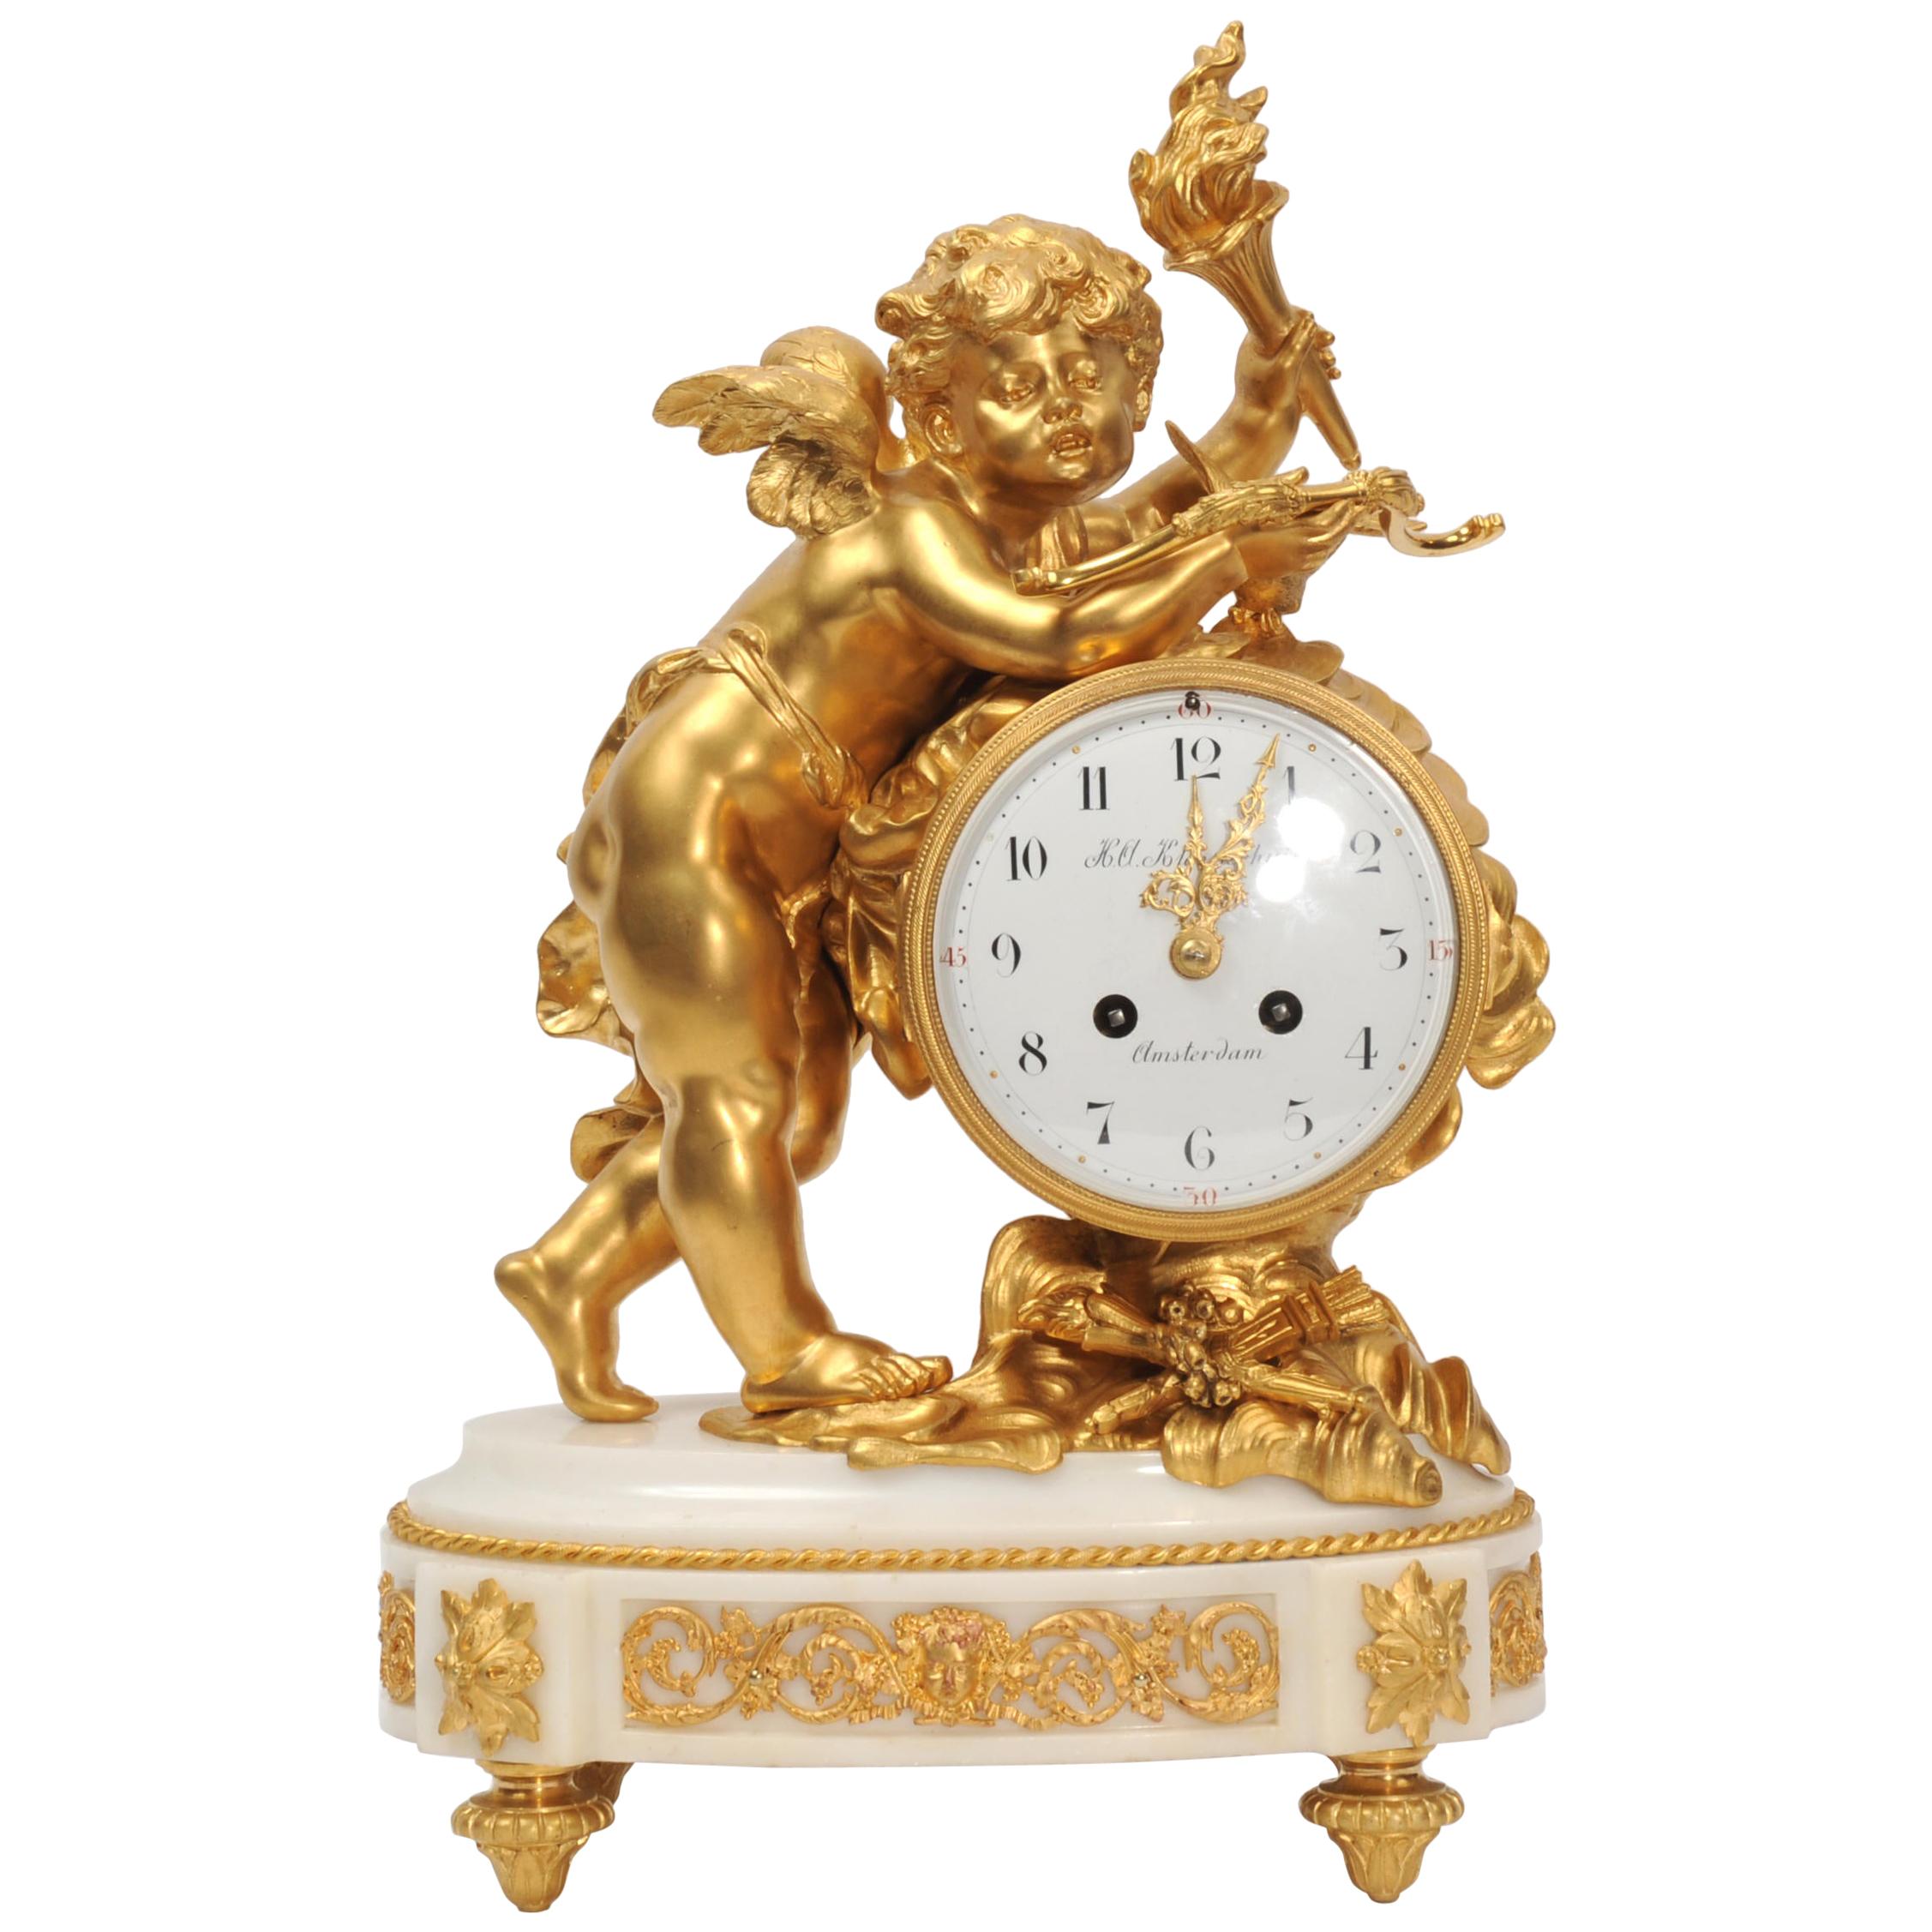 Cupid - Antique French Ormolu Bronze and White Marble Clock